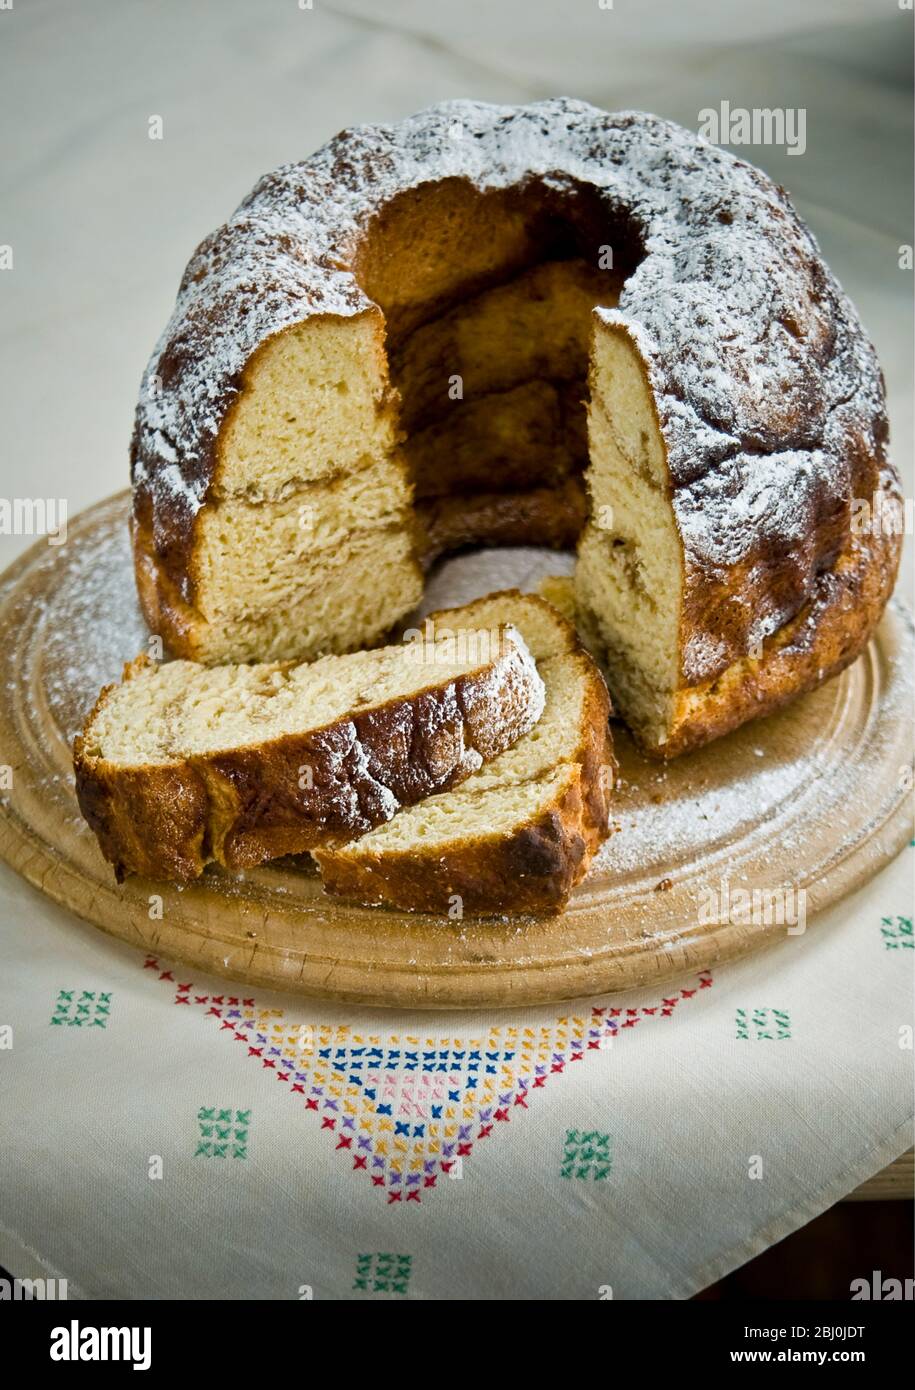 Cinnamon yeast cake baked in tall ring shaped cake tin Stock Photo